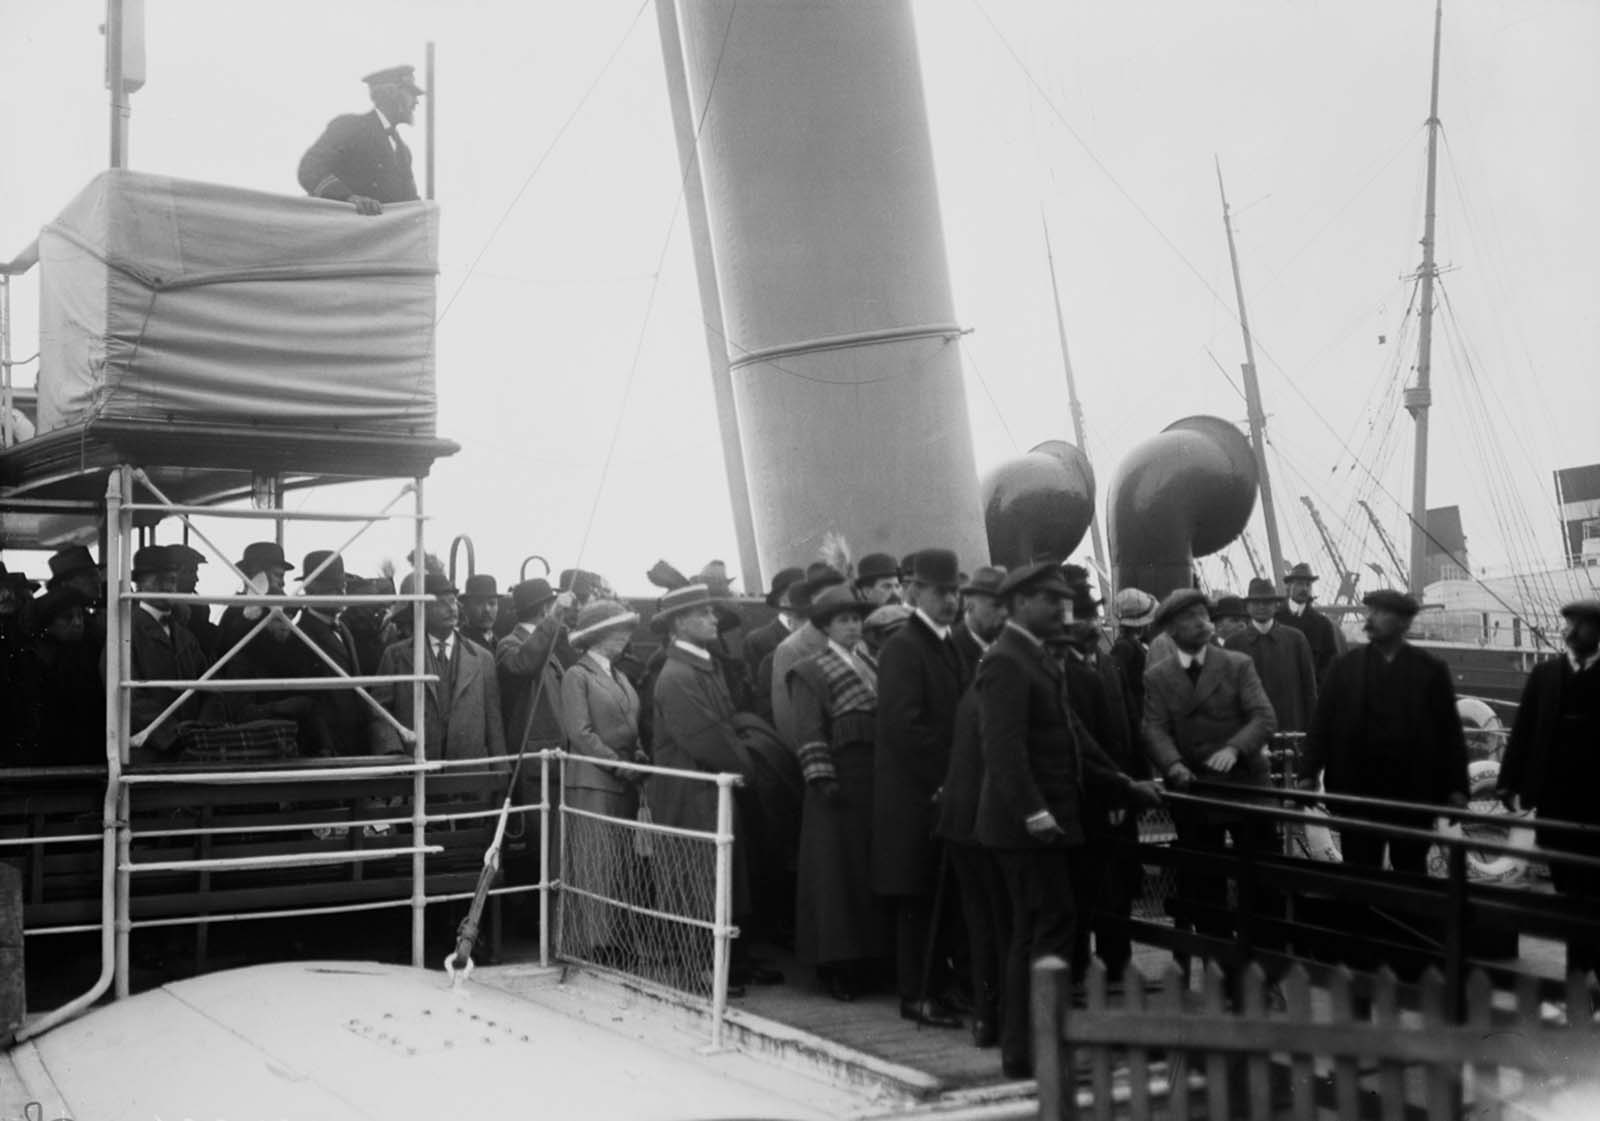 Relatives wait for the surviving crew to come ashore at Southampton.